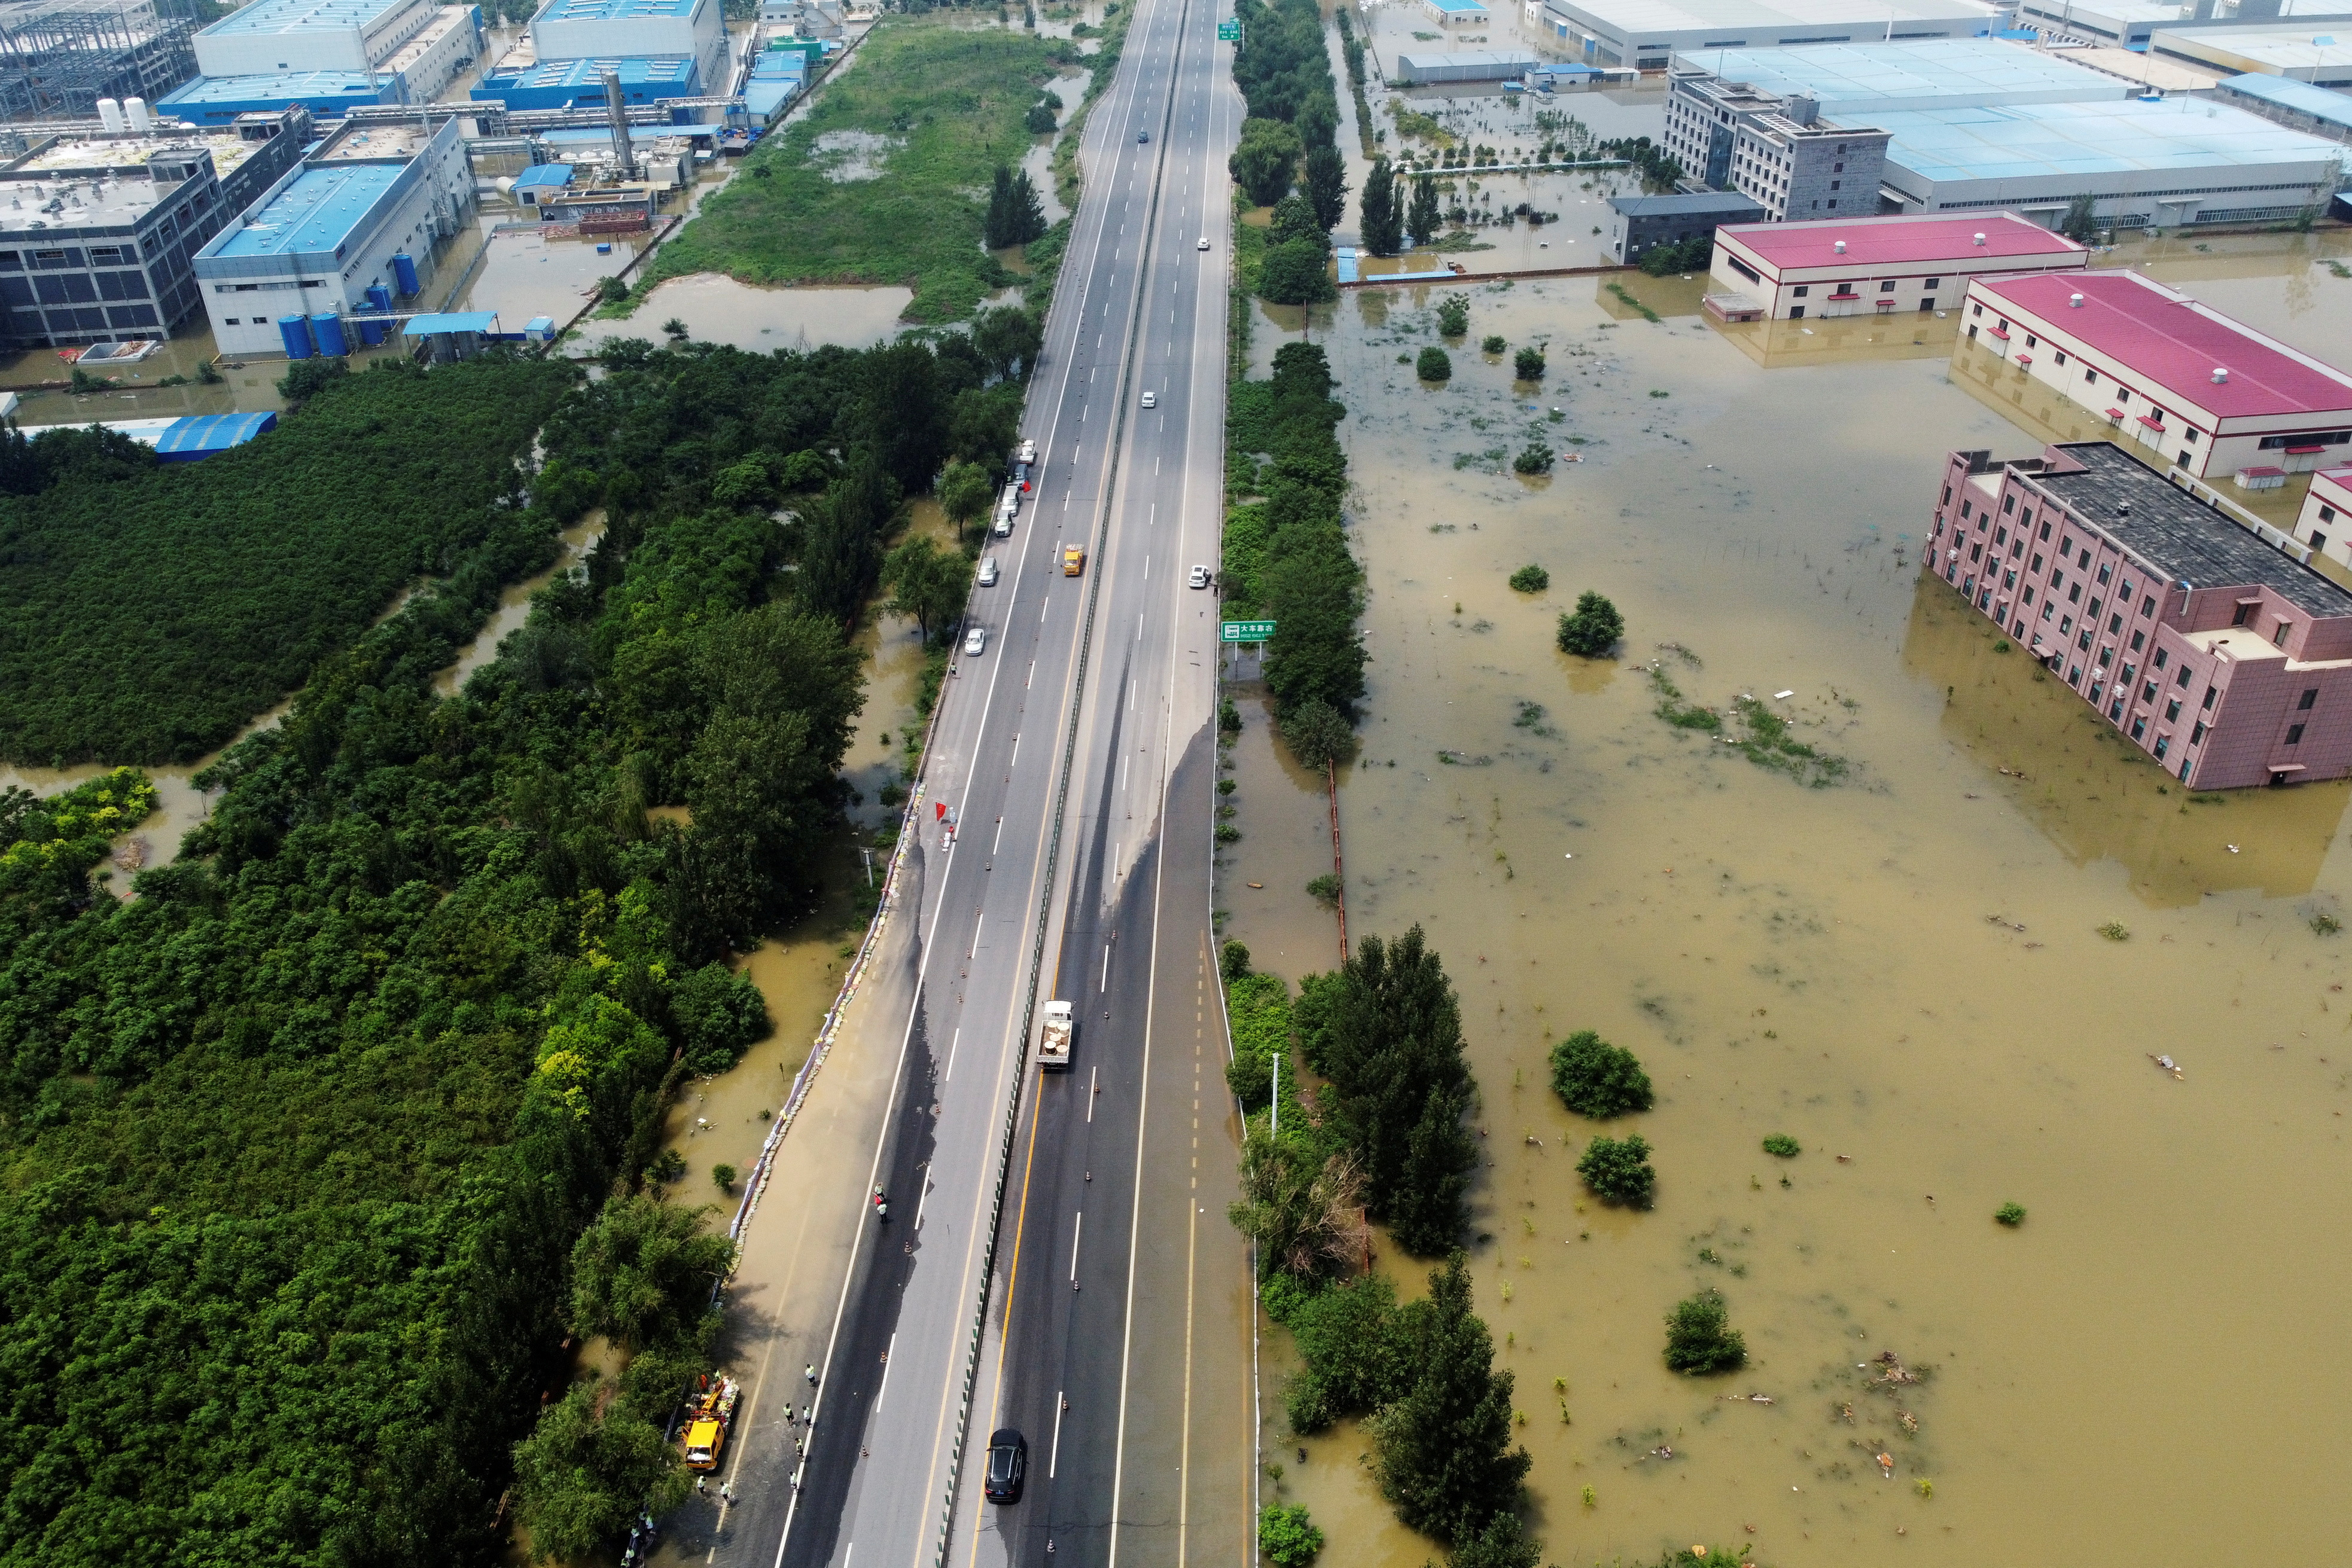  flooded industrial buildings by a highway following heavy rainfall in Xinxiang